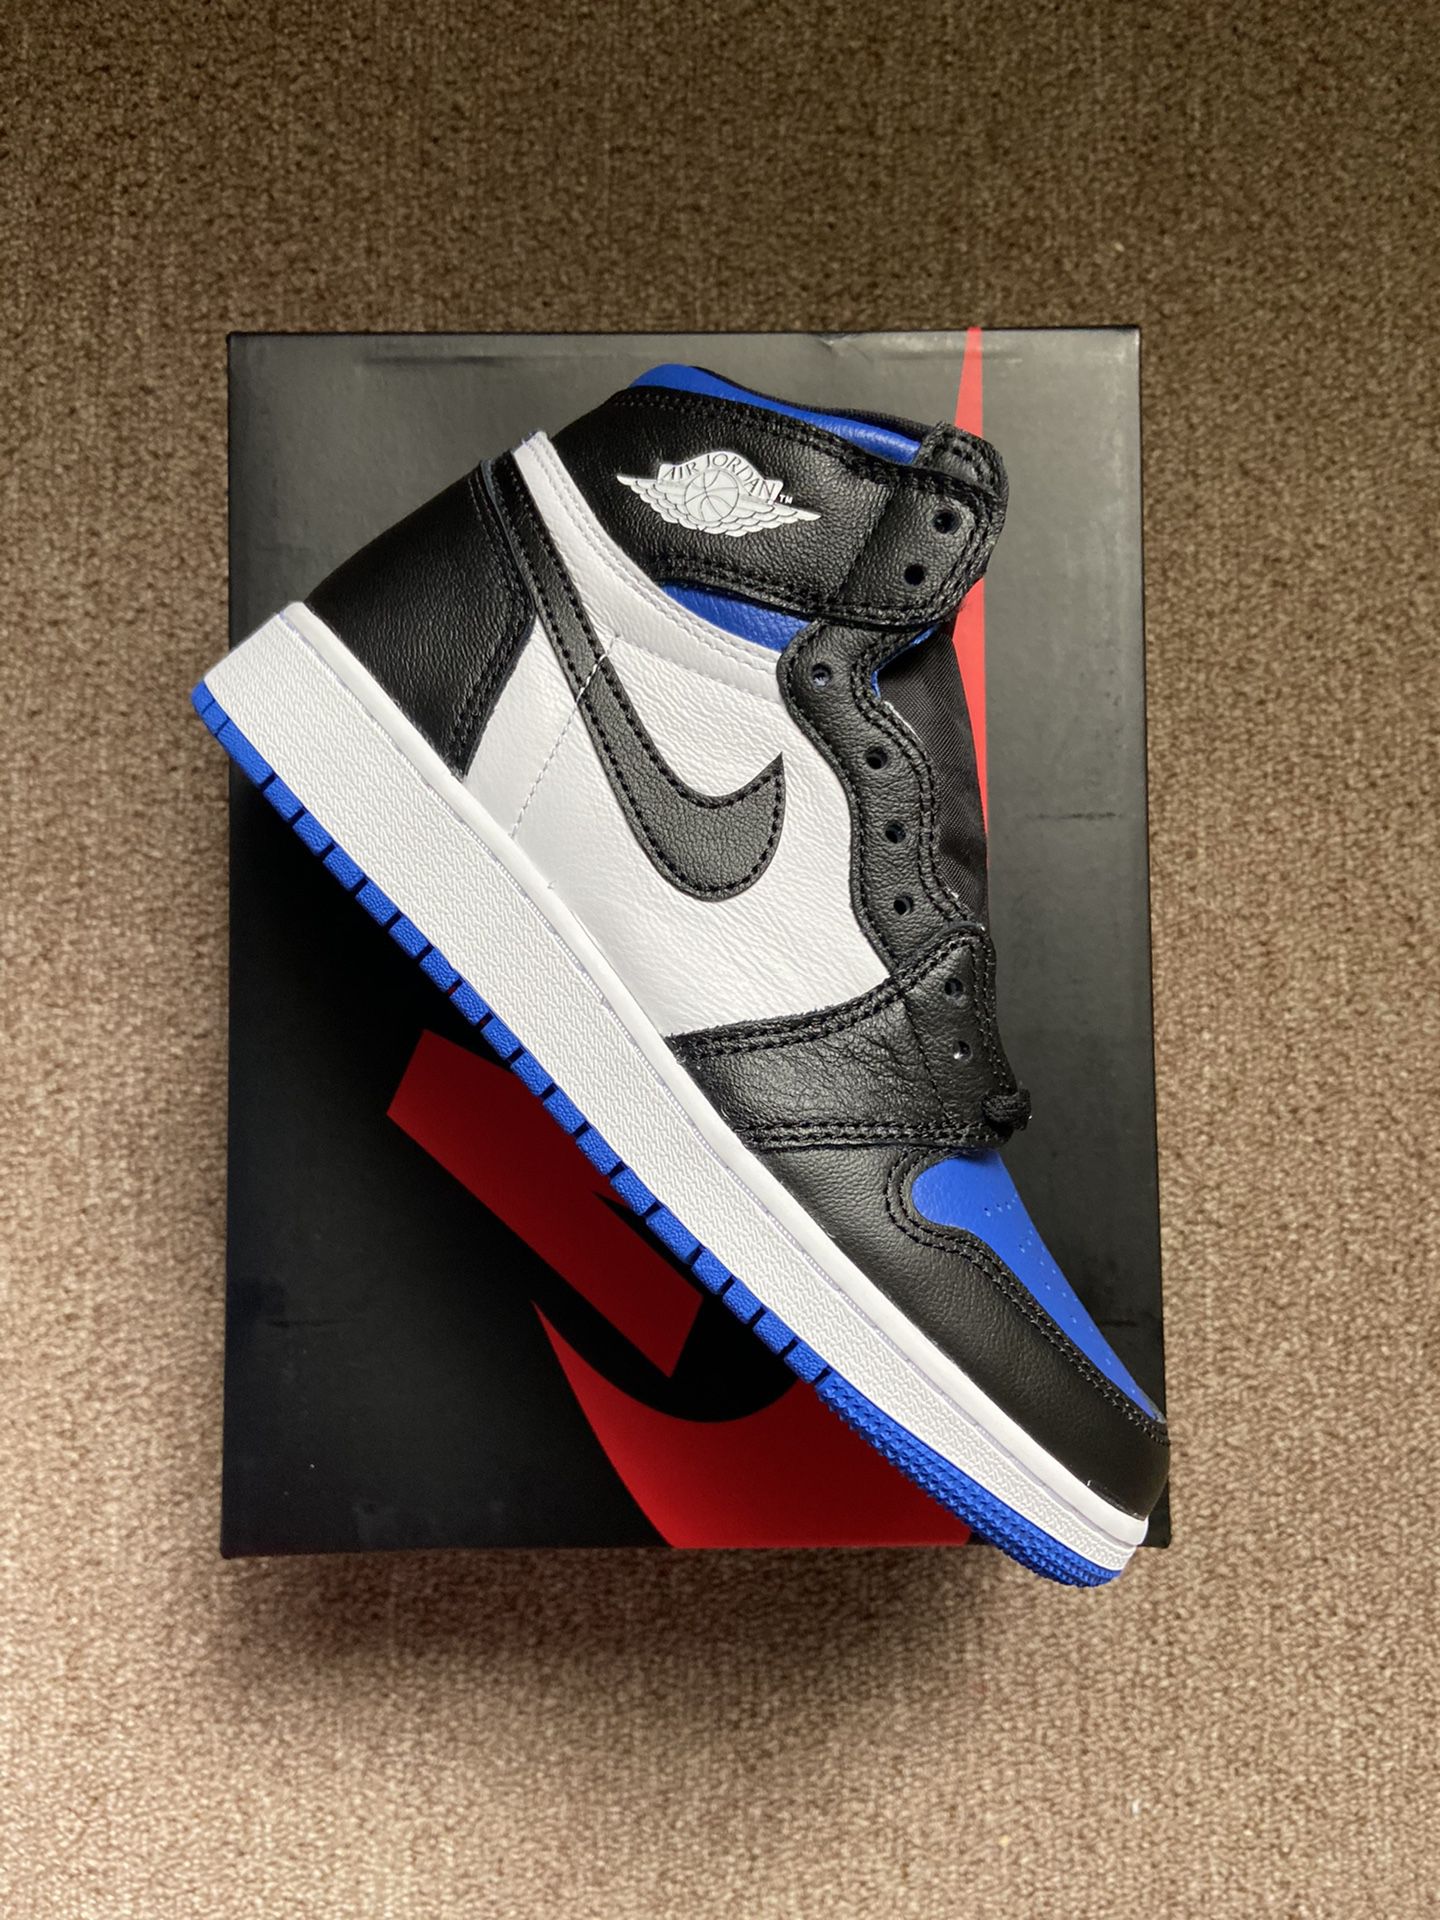 Brand new Jordan 1s “ royal toes “ size 5y